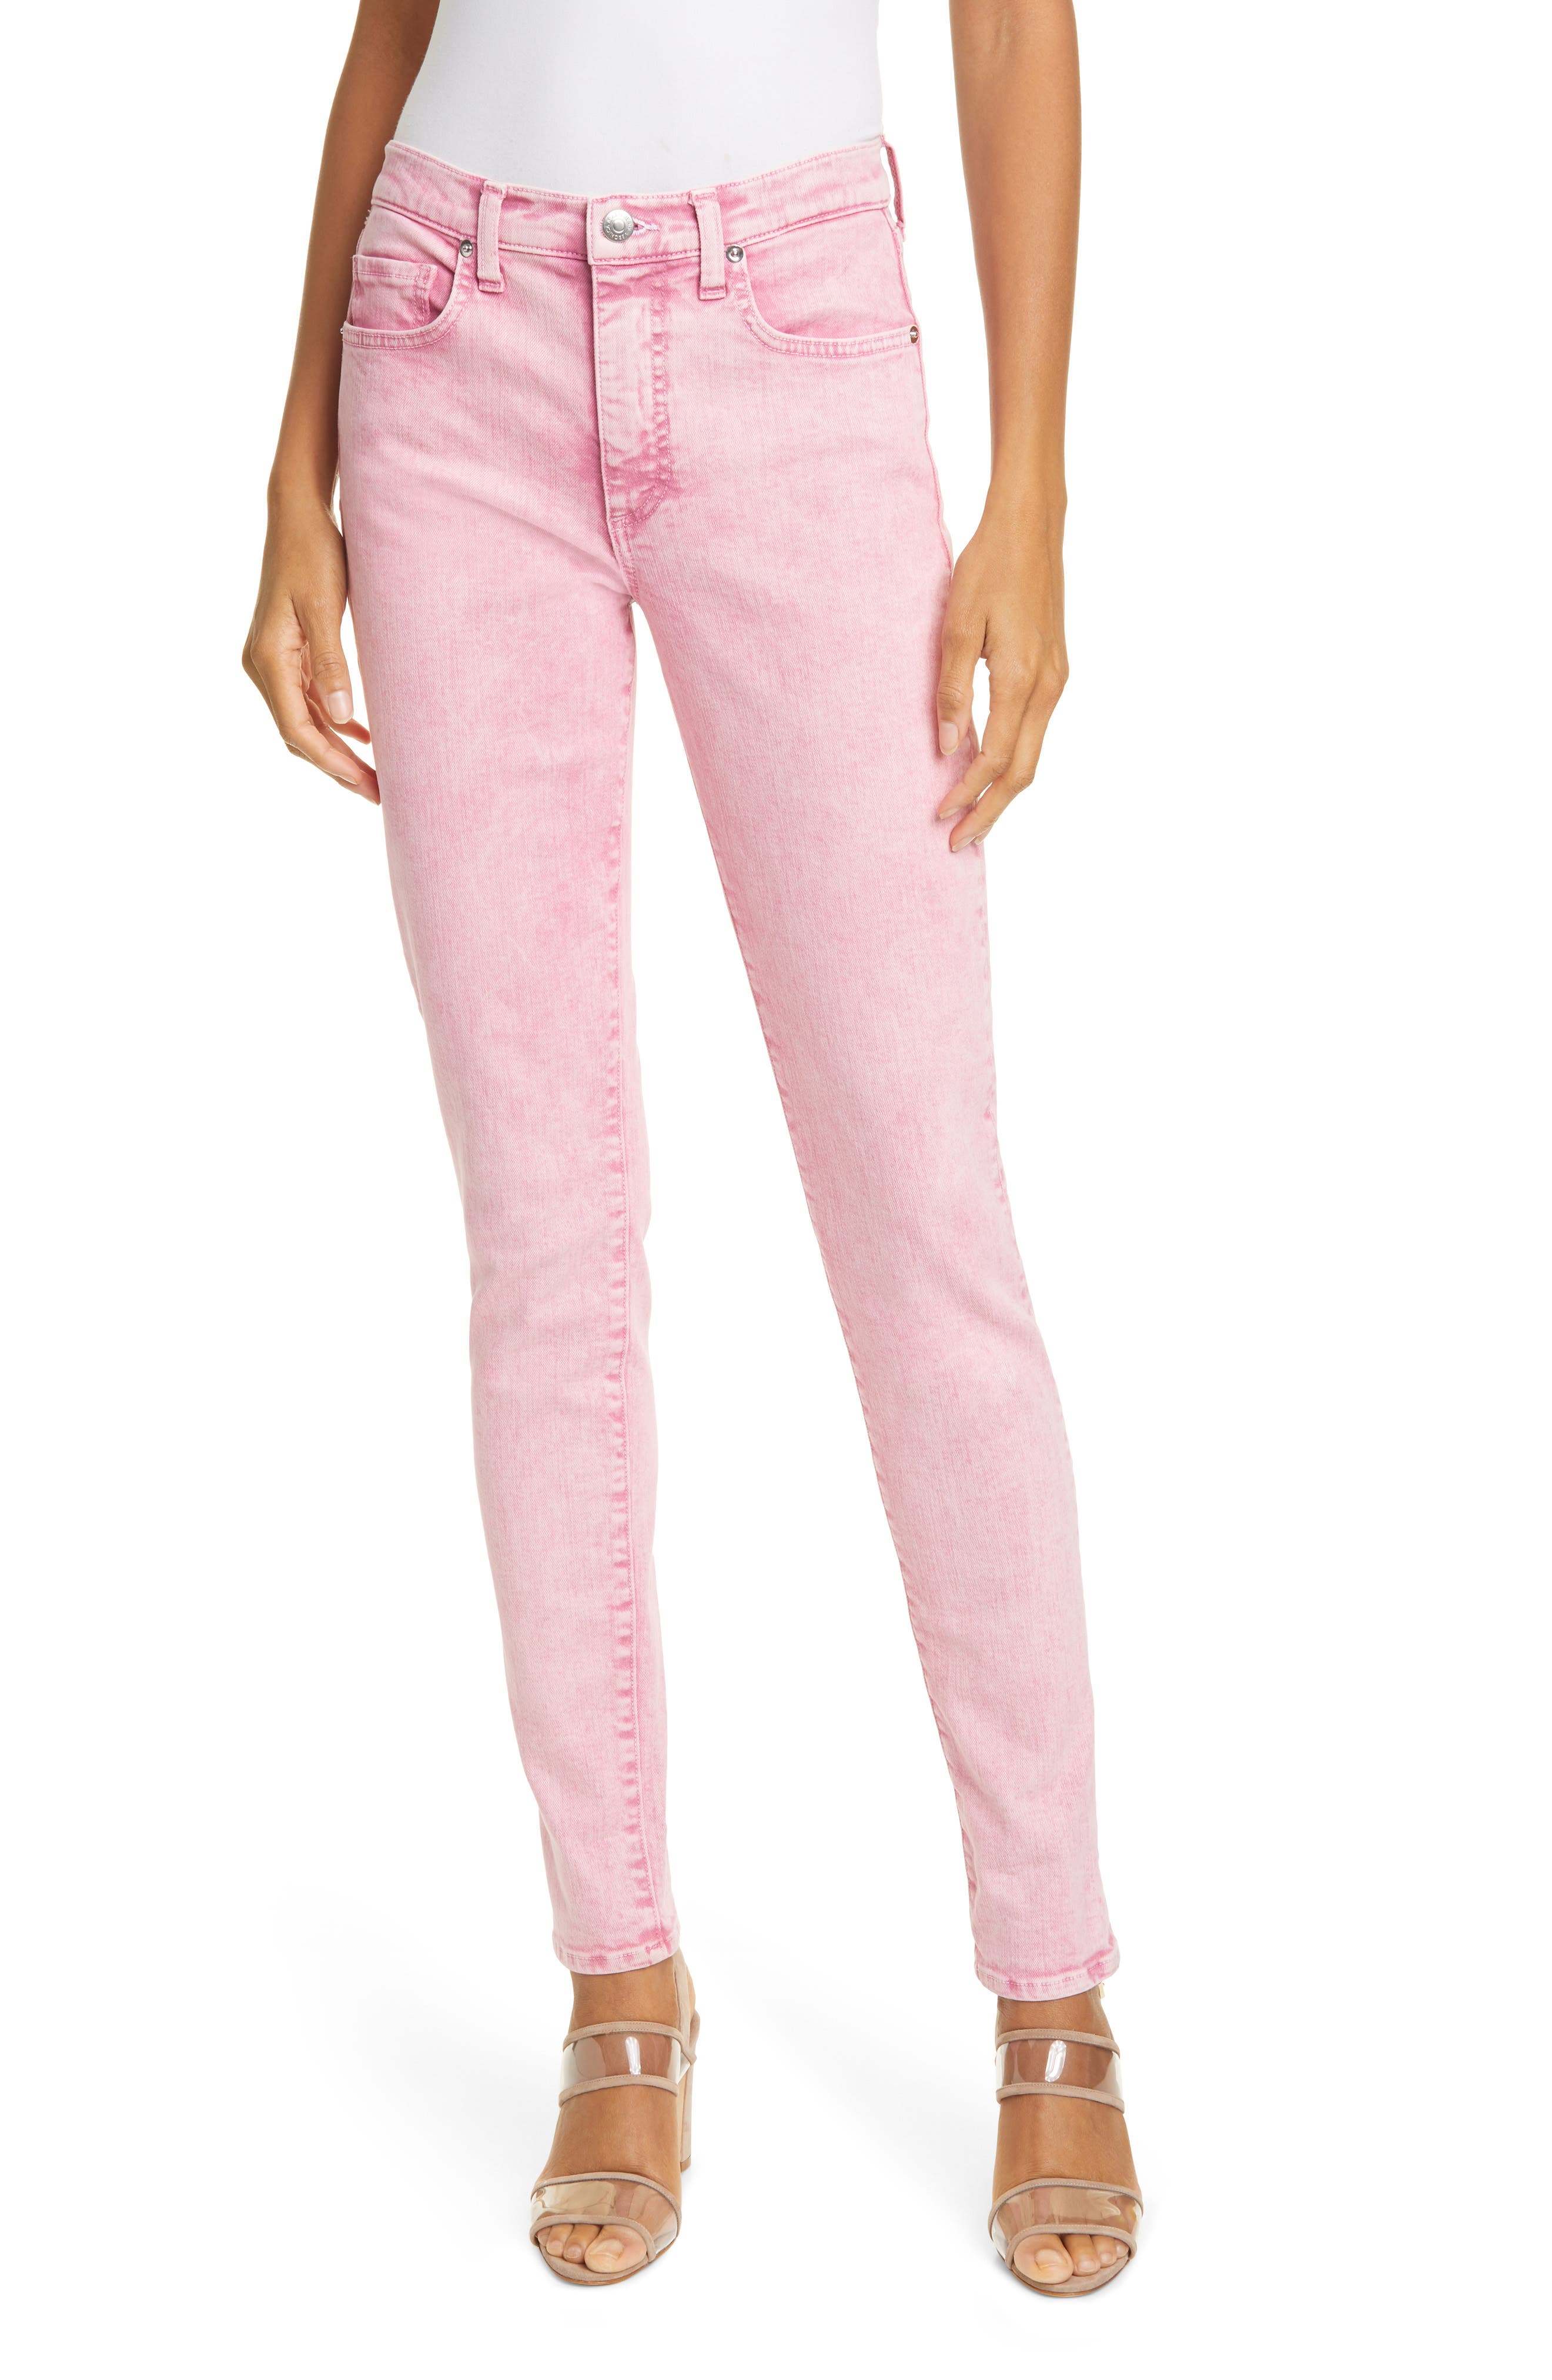 high waisted pink skinny jeans